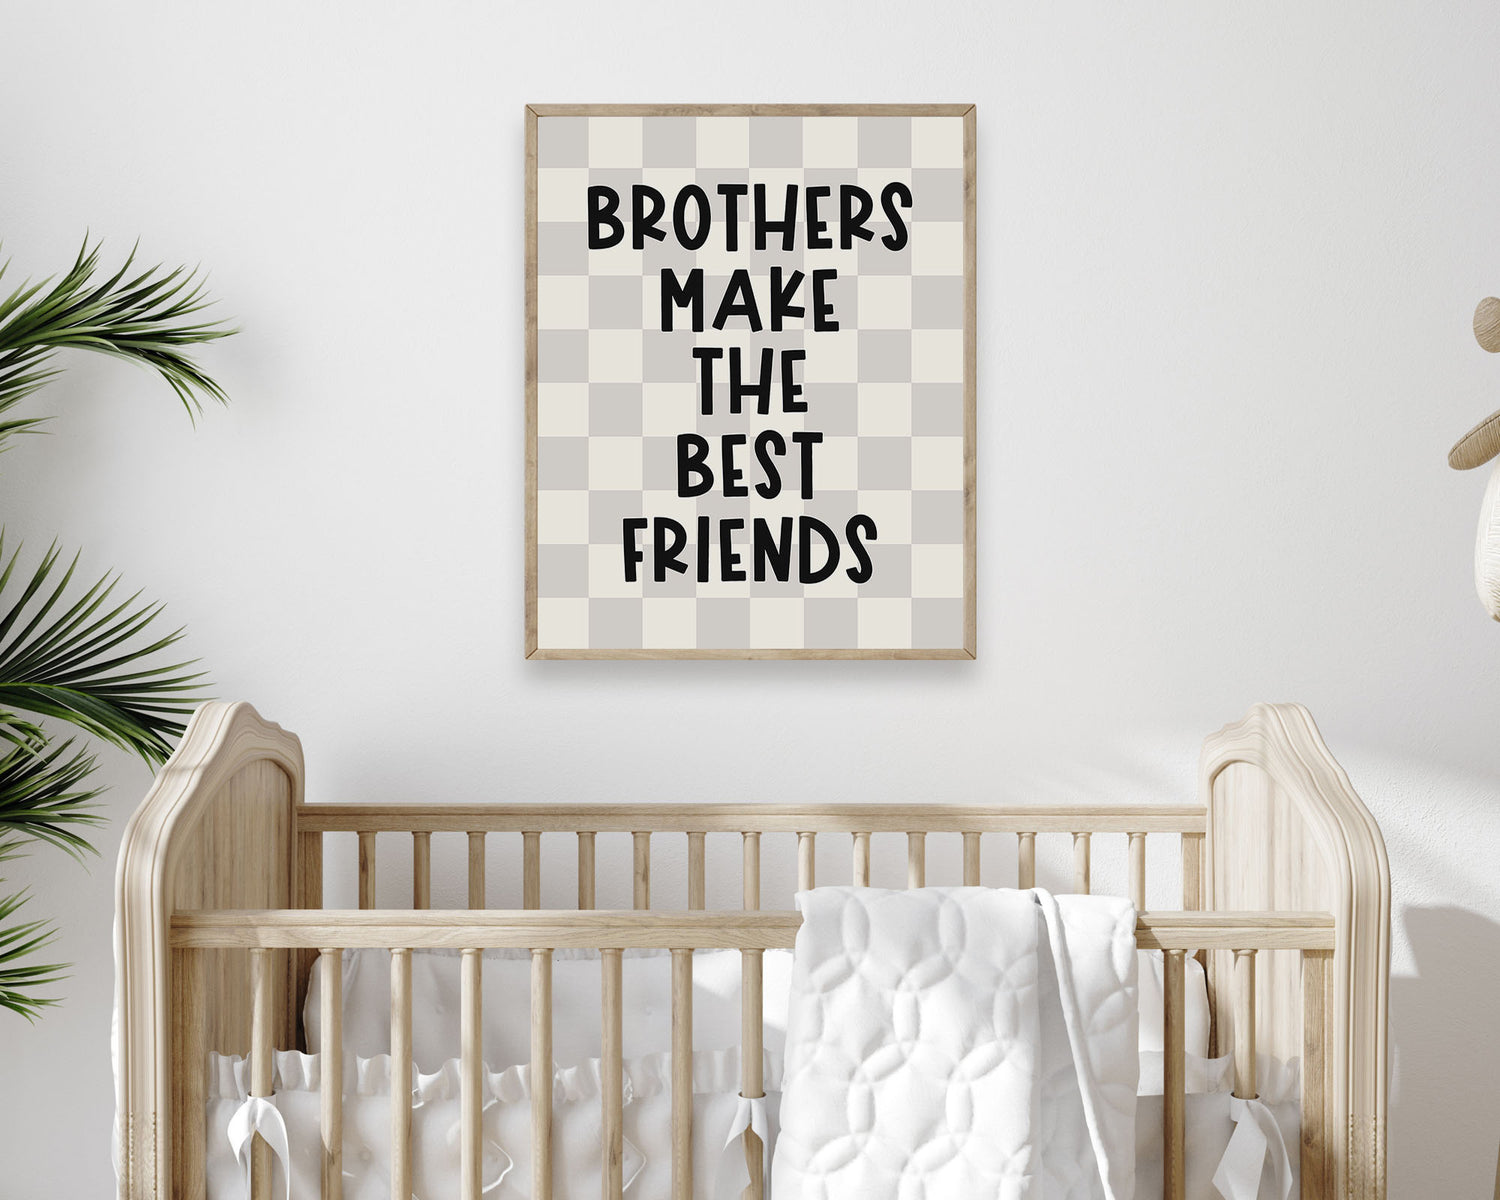 Brothers Make The Best Friends Instant Download Digital File featuring fun kids lettering in black on a greige (pale gray / light beige) and off white checkered background. Perfect for Twin Baby Boys Nursery Decor, Toddler Boys Shared Bedroom Decor or Little Boys Playroom Wall Art.